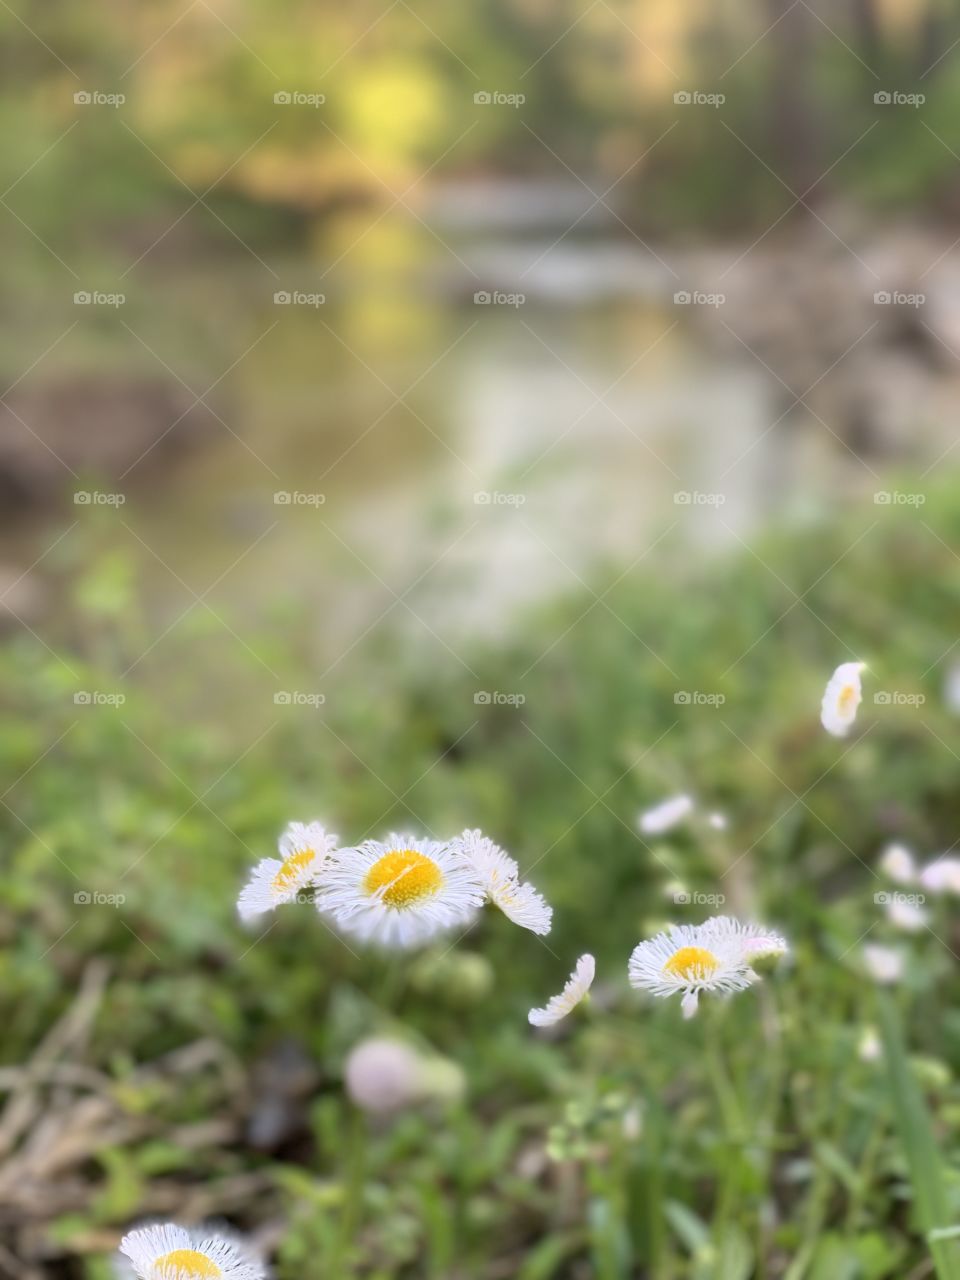 Sometimes the simplest flowers are the most beautiful! Especially next to a small creek.